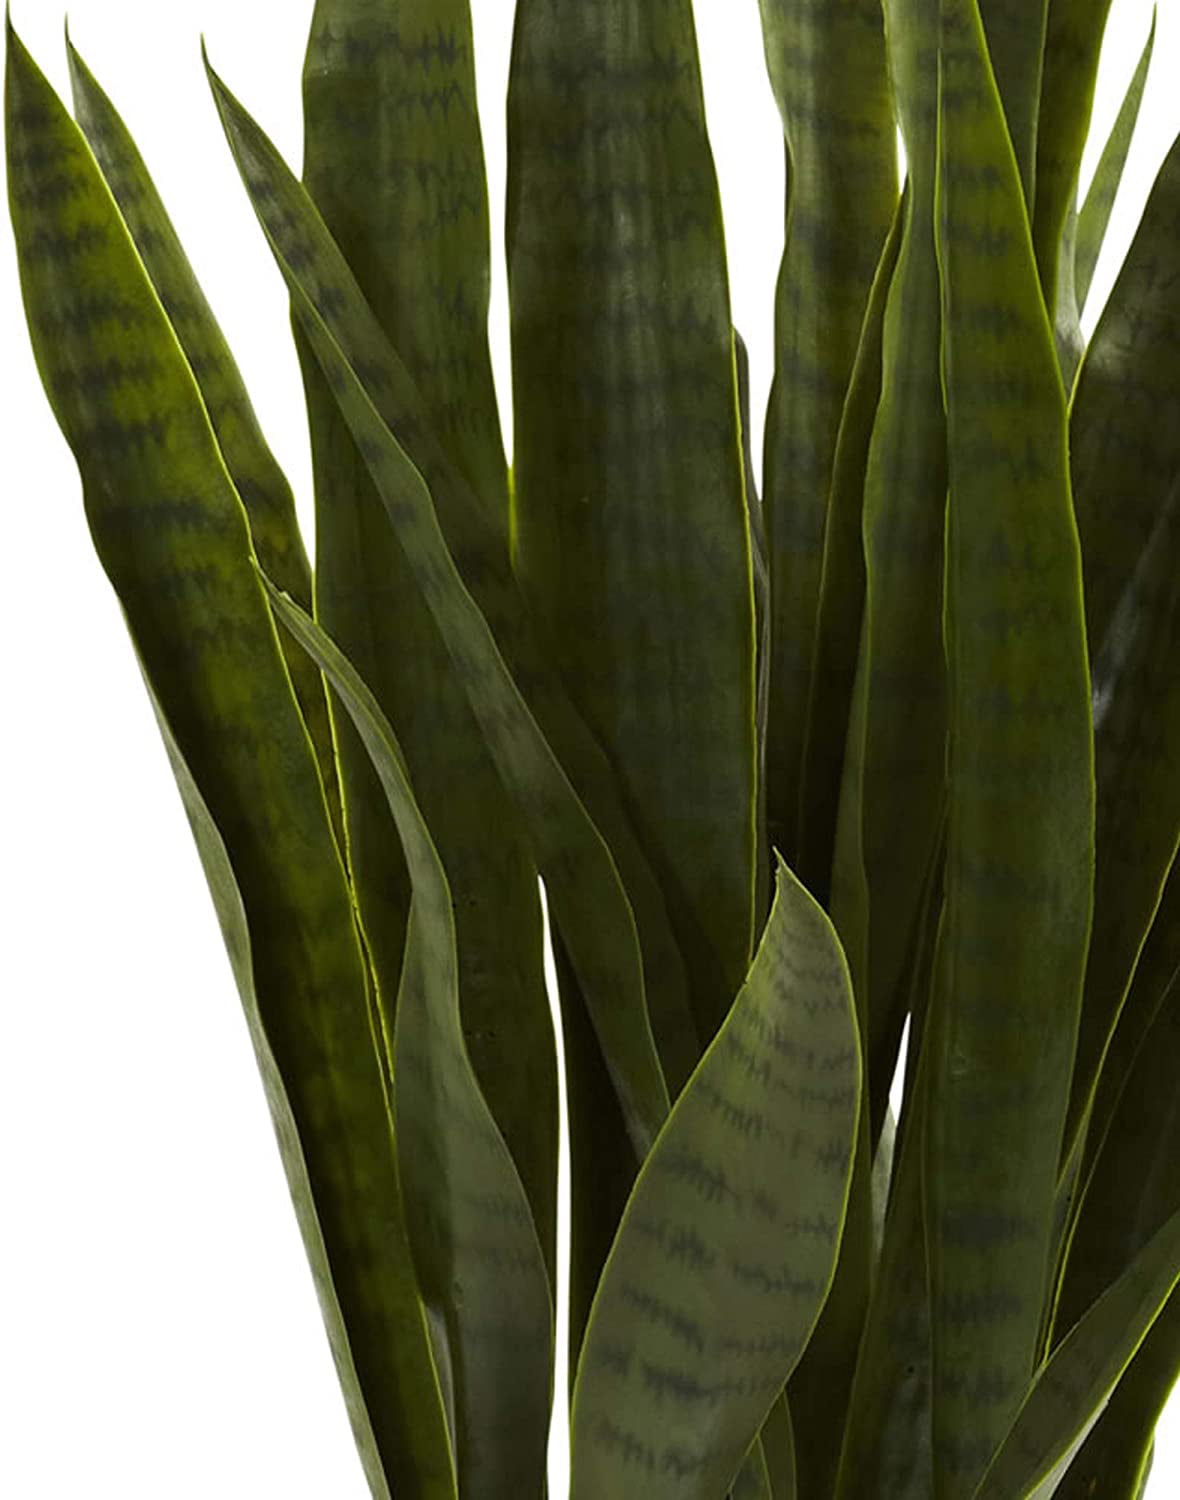 Green Nearly Natural 4855 Sansevieria Plant with Black Planter